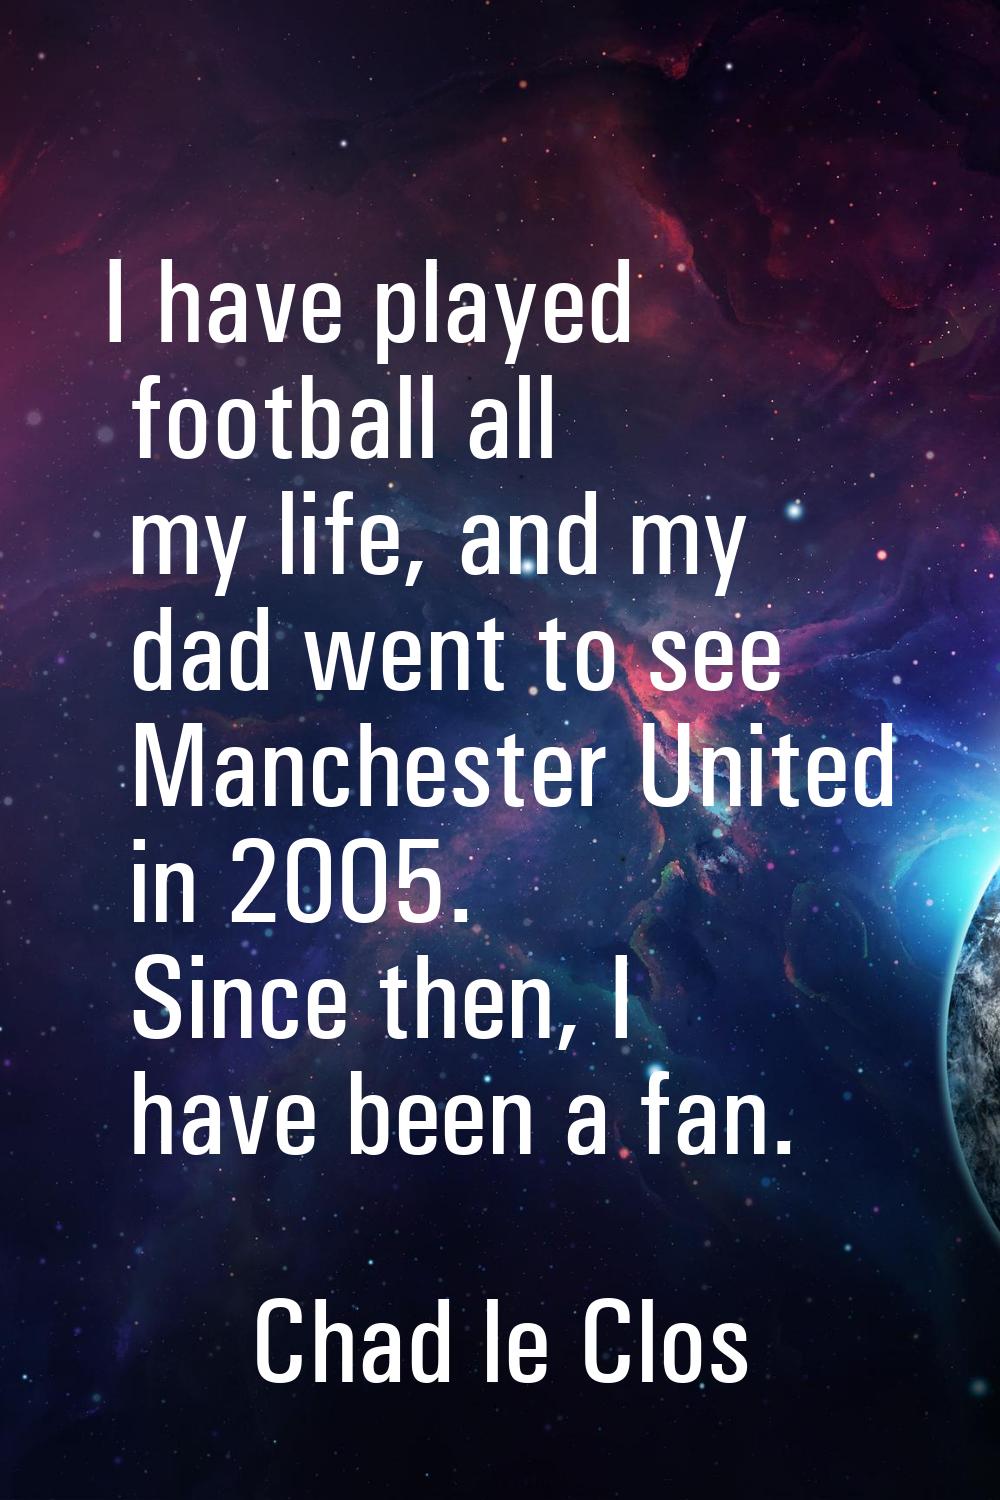 I have played football all my life, and my dad went to see Manchester United in 2005. Since then, I